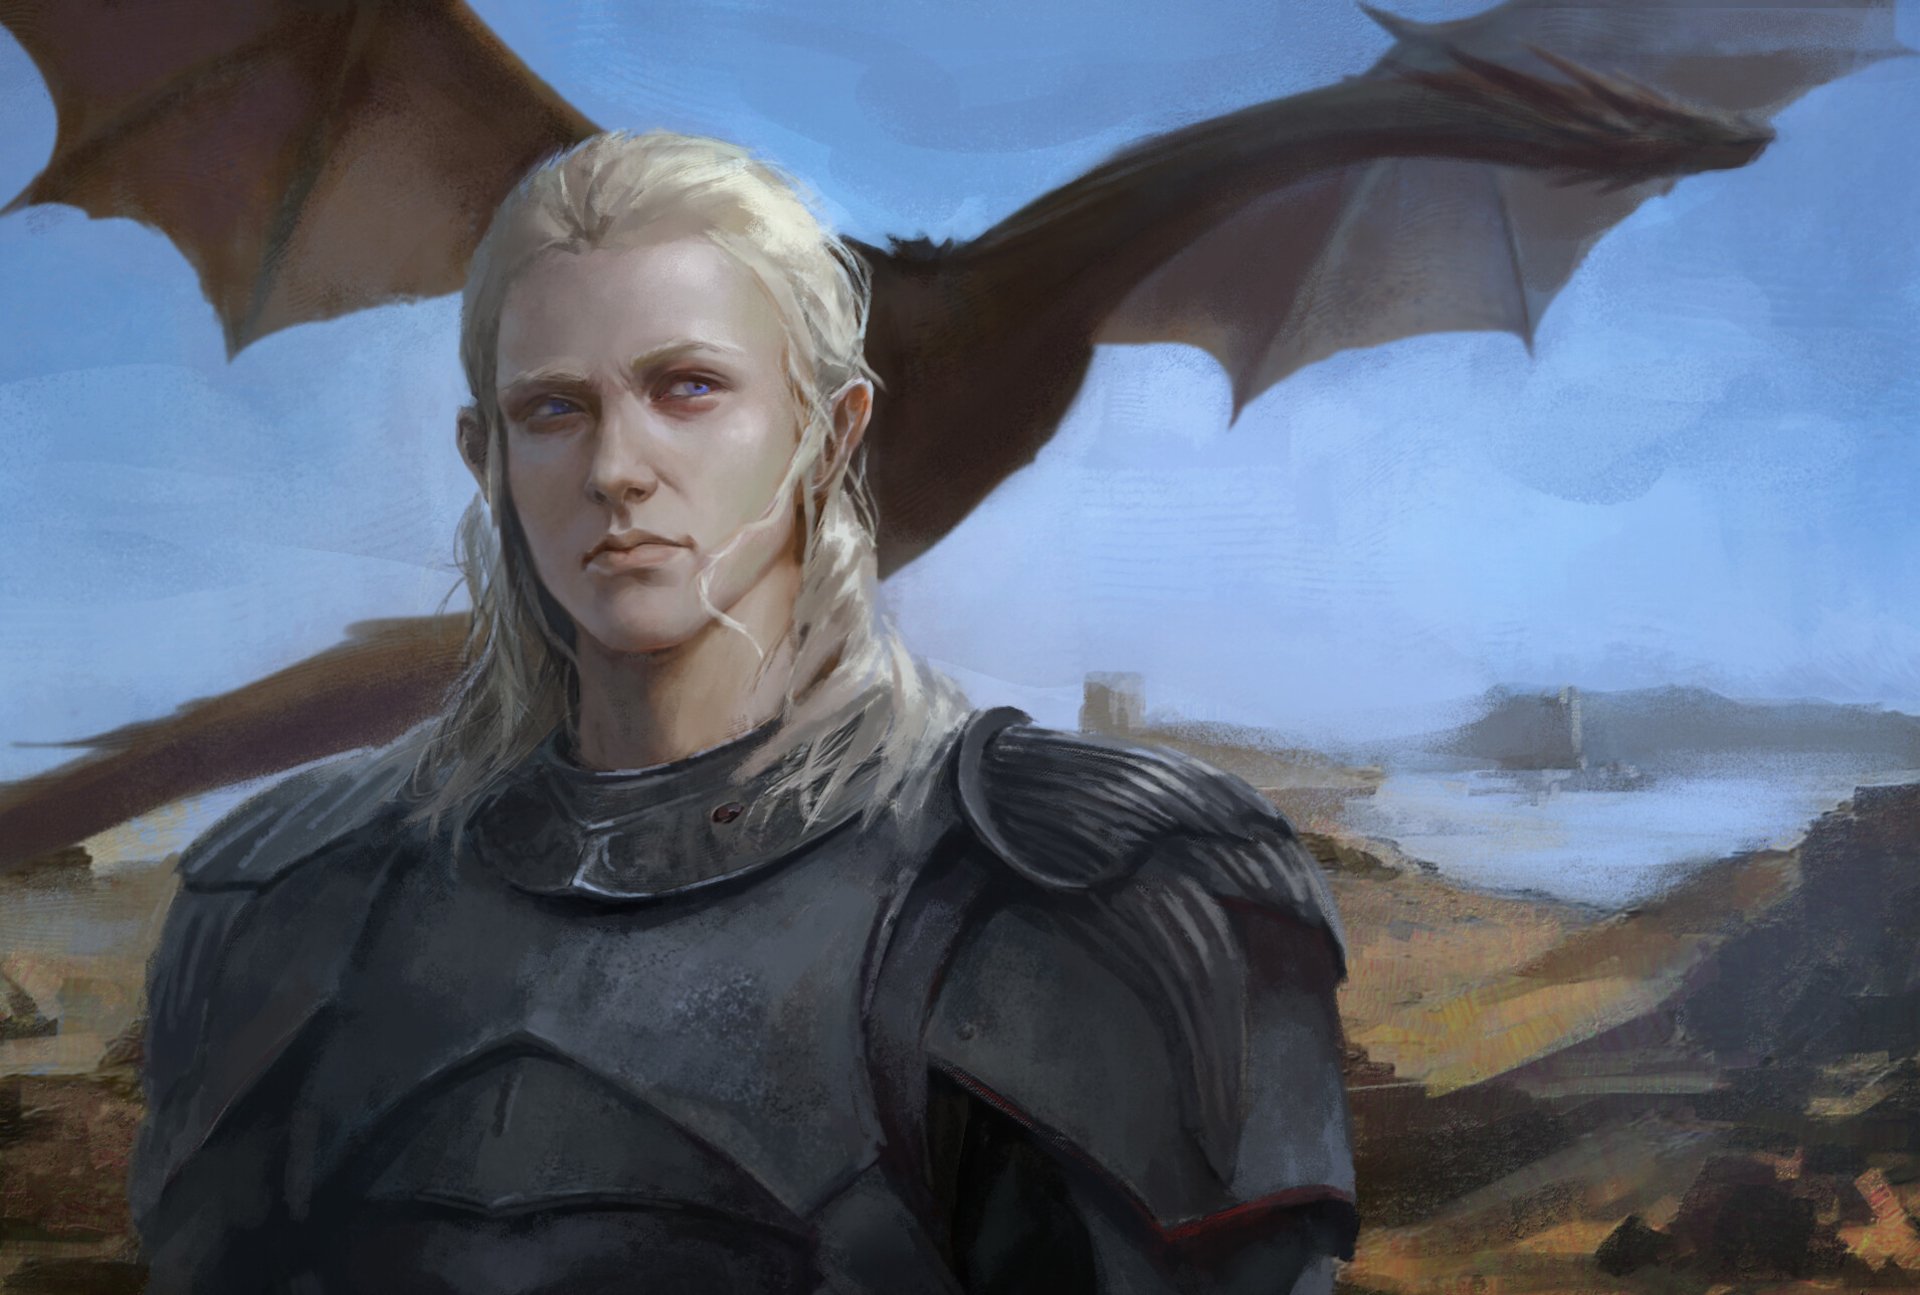 House of the Dragon HD Wallpaper by Grenze 张